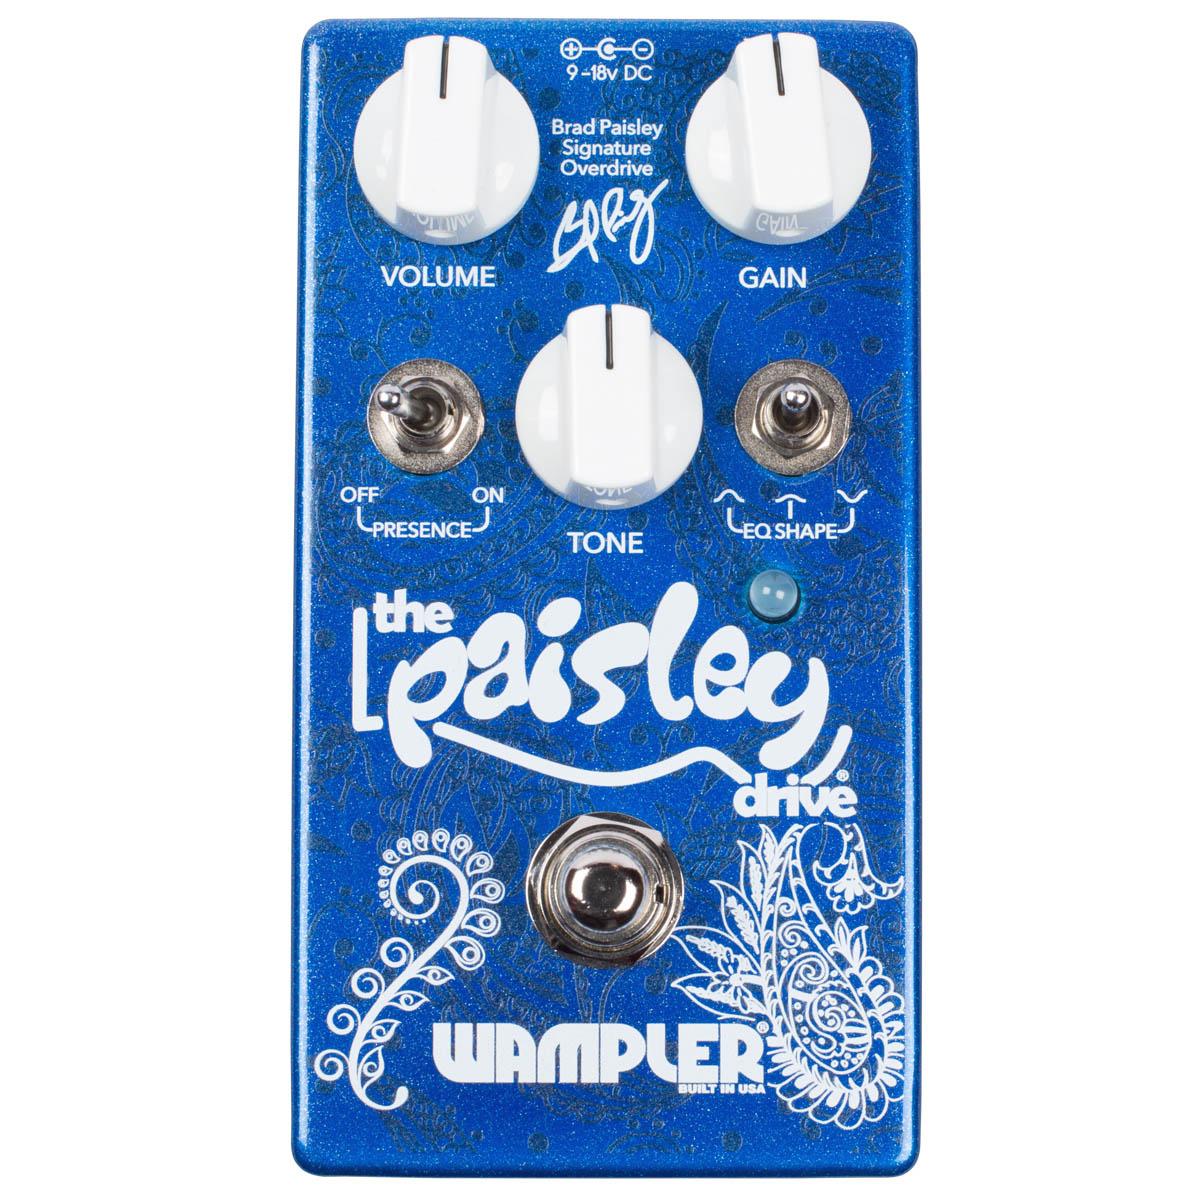 Wampler Signature Brad Paisley Overdrive Effects Pedal